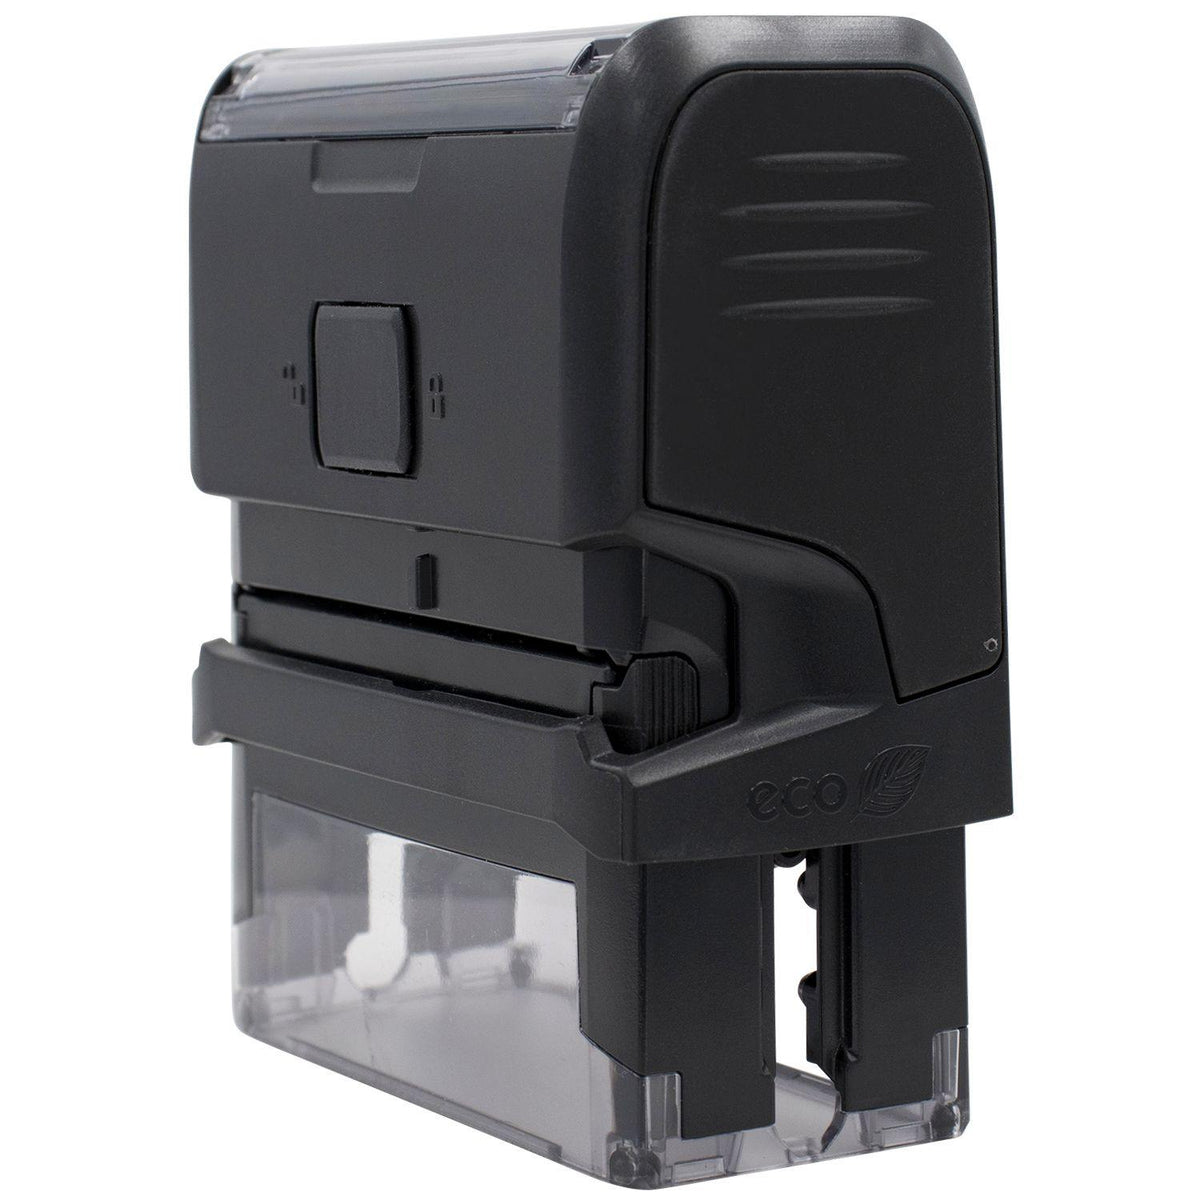 Side View of Large Self Inking Application Complete Stamp at an Angle